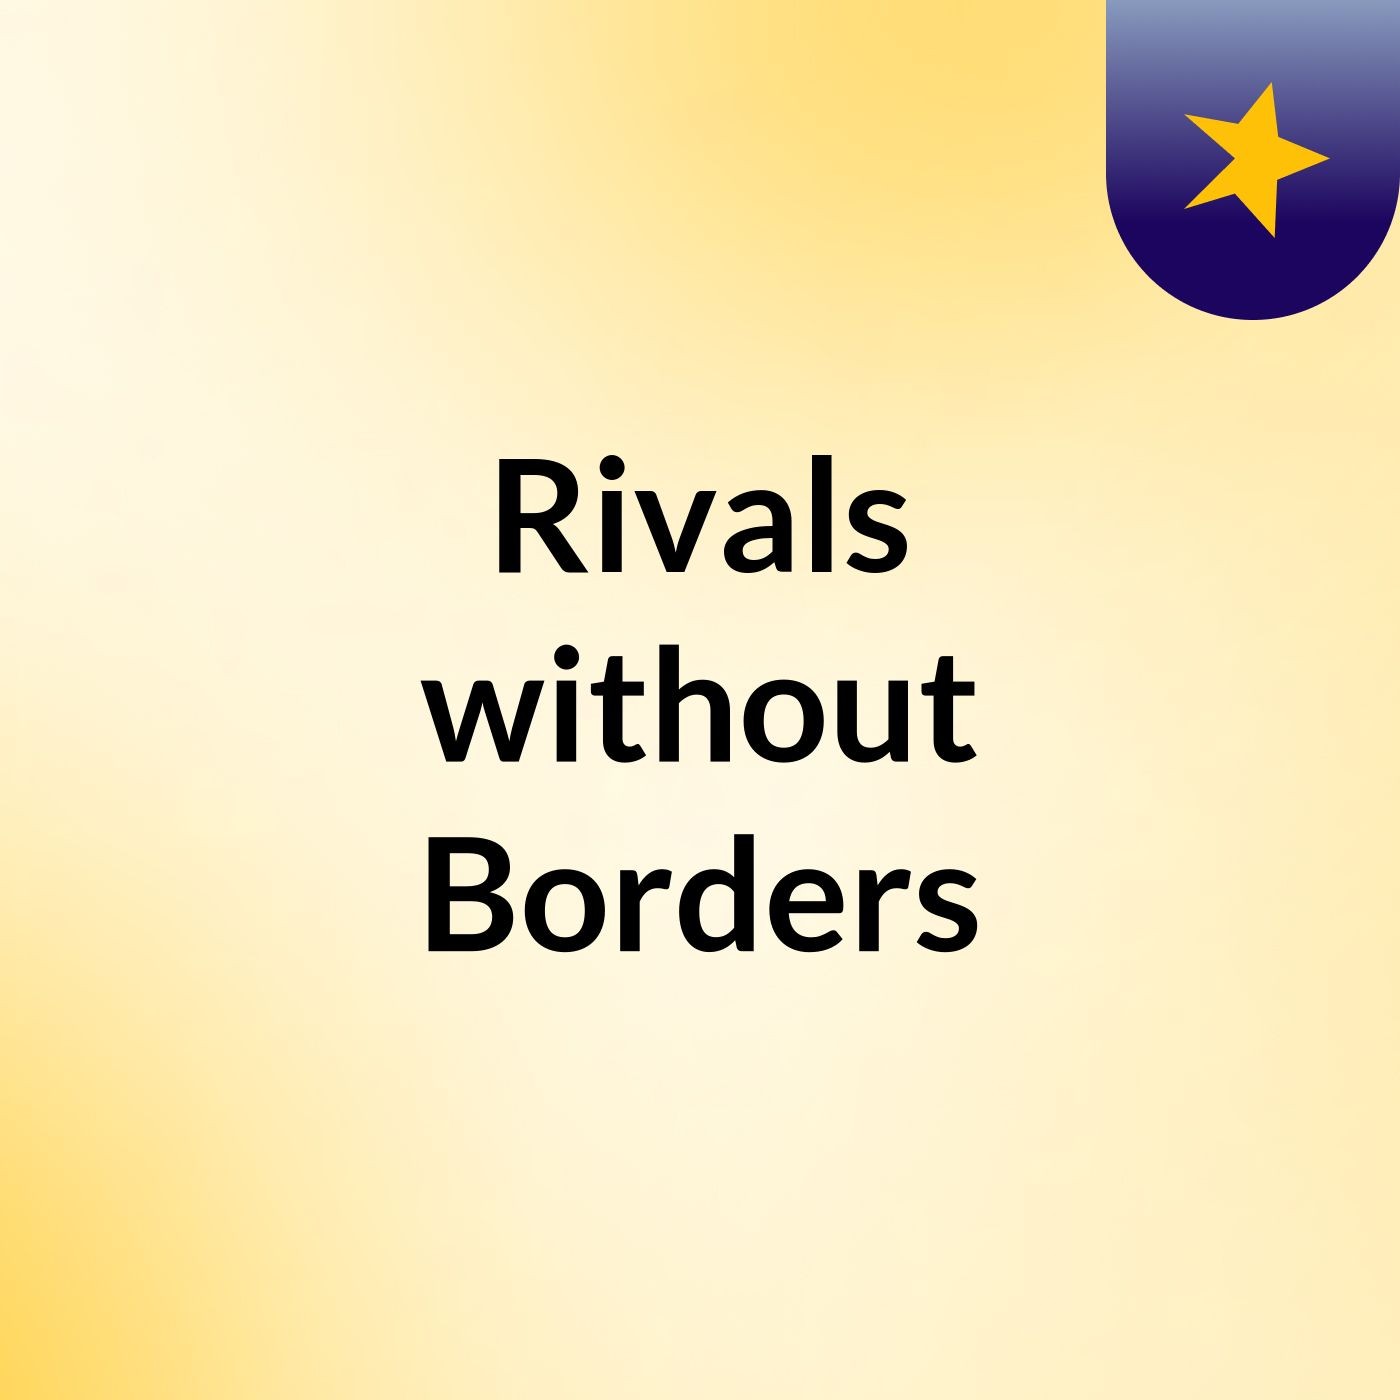 Rivals without Borders